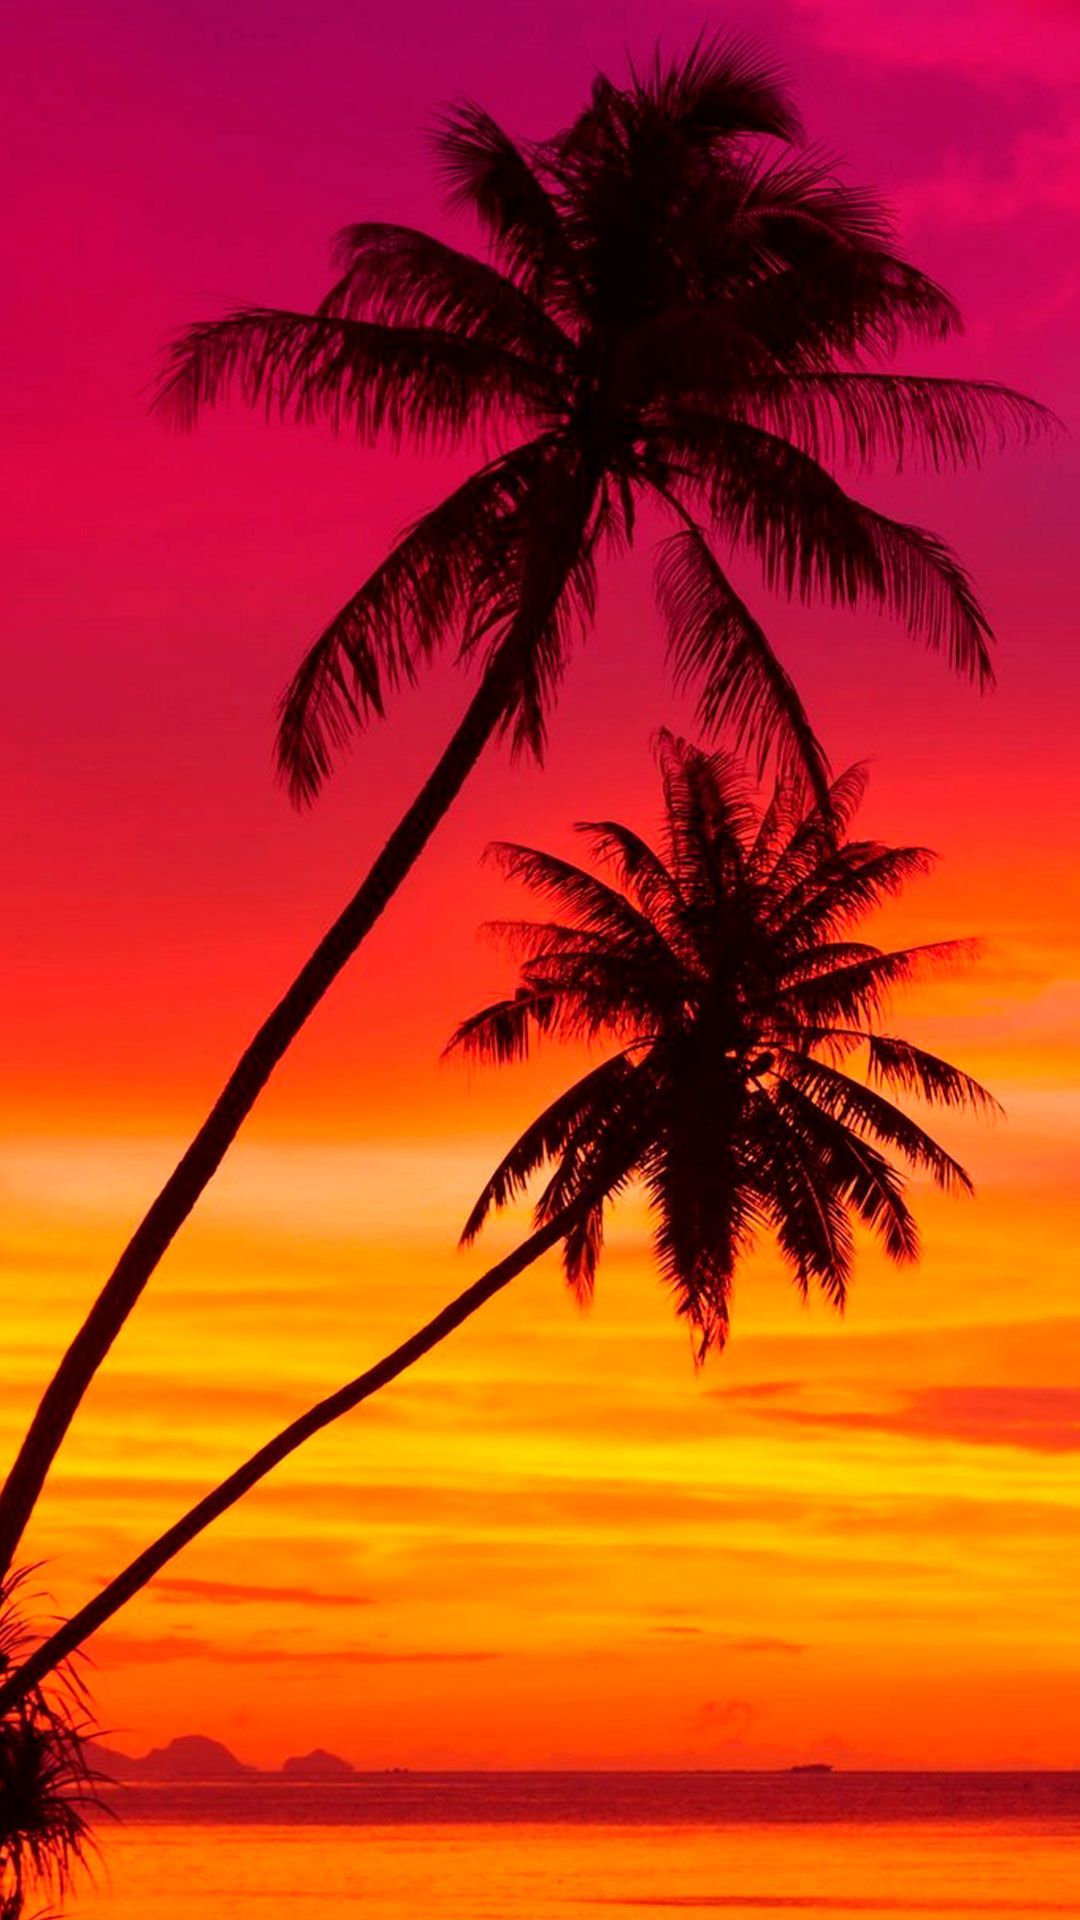 Sunset Wallpaper for iPhone X, 6